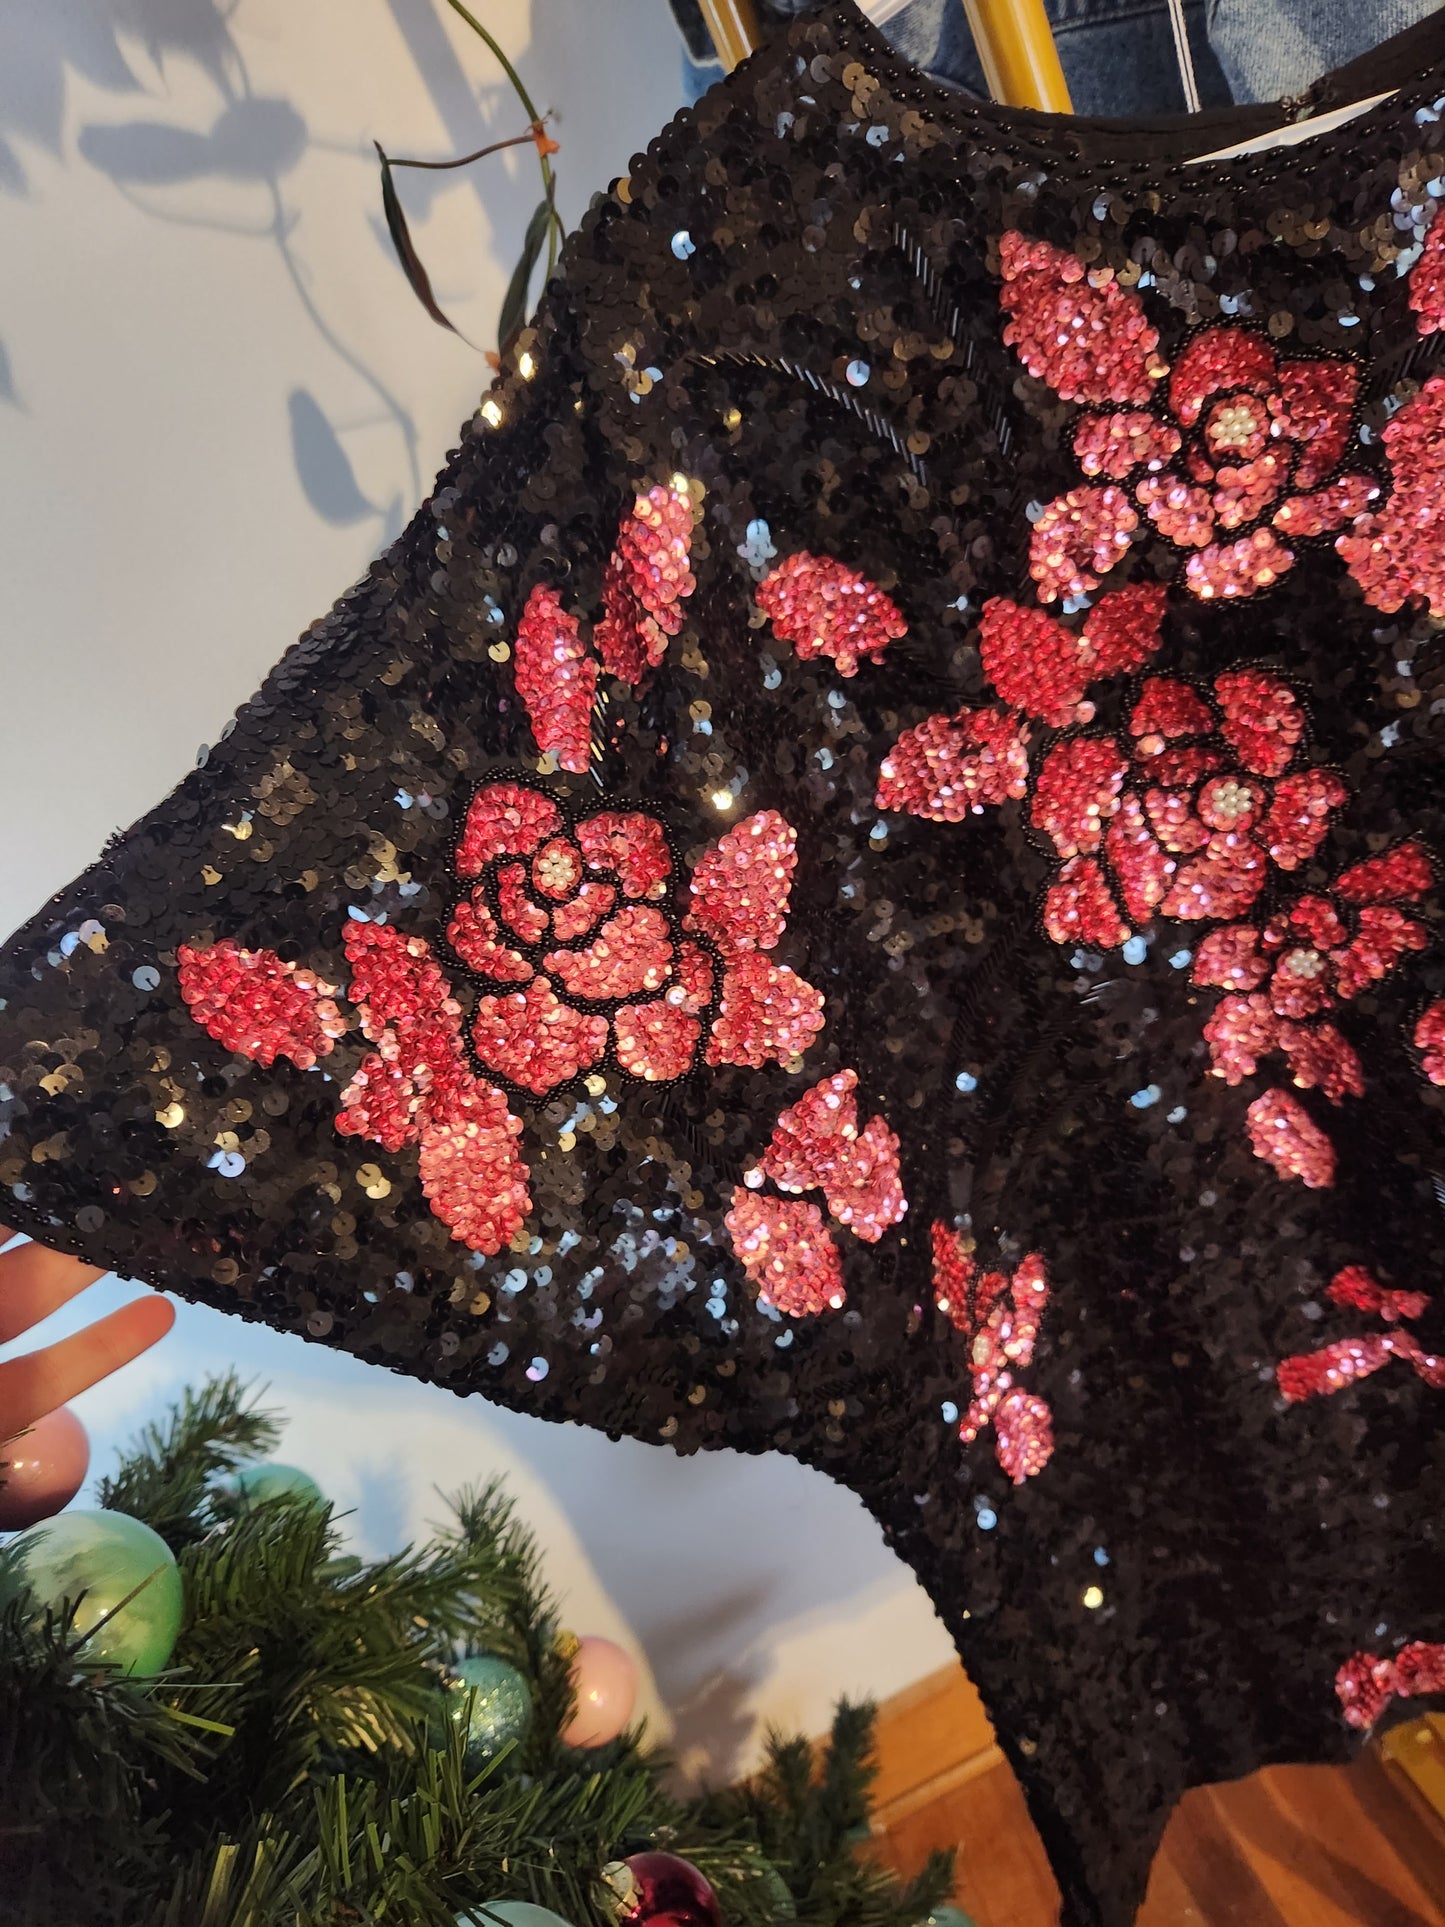 Black and Pink Sequin Top (L)